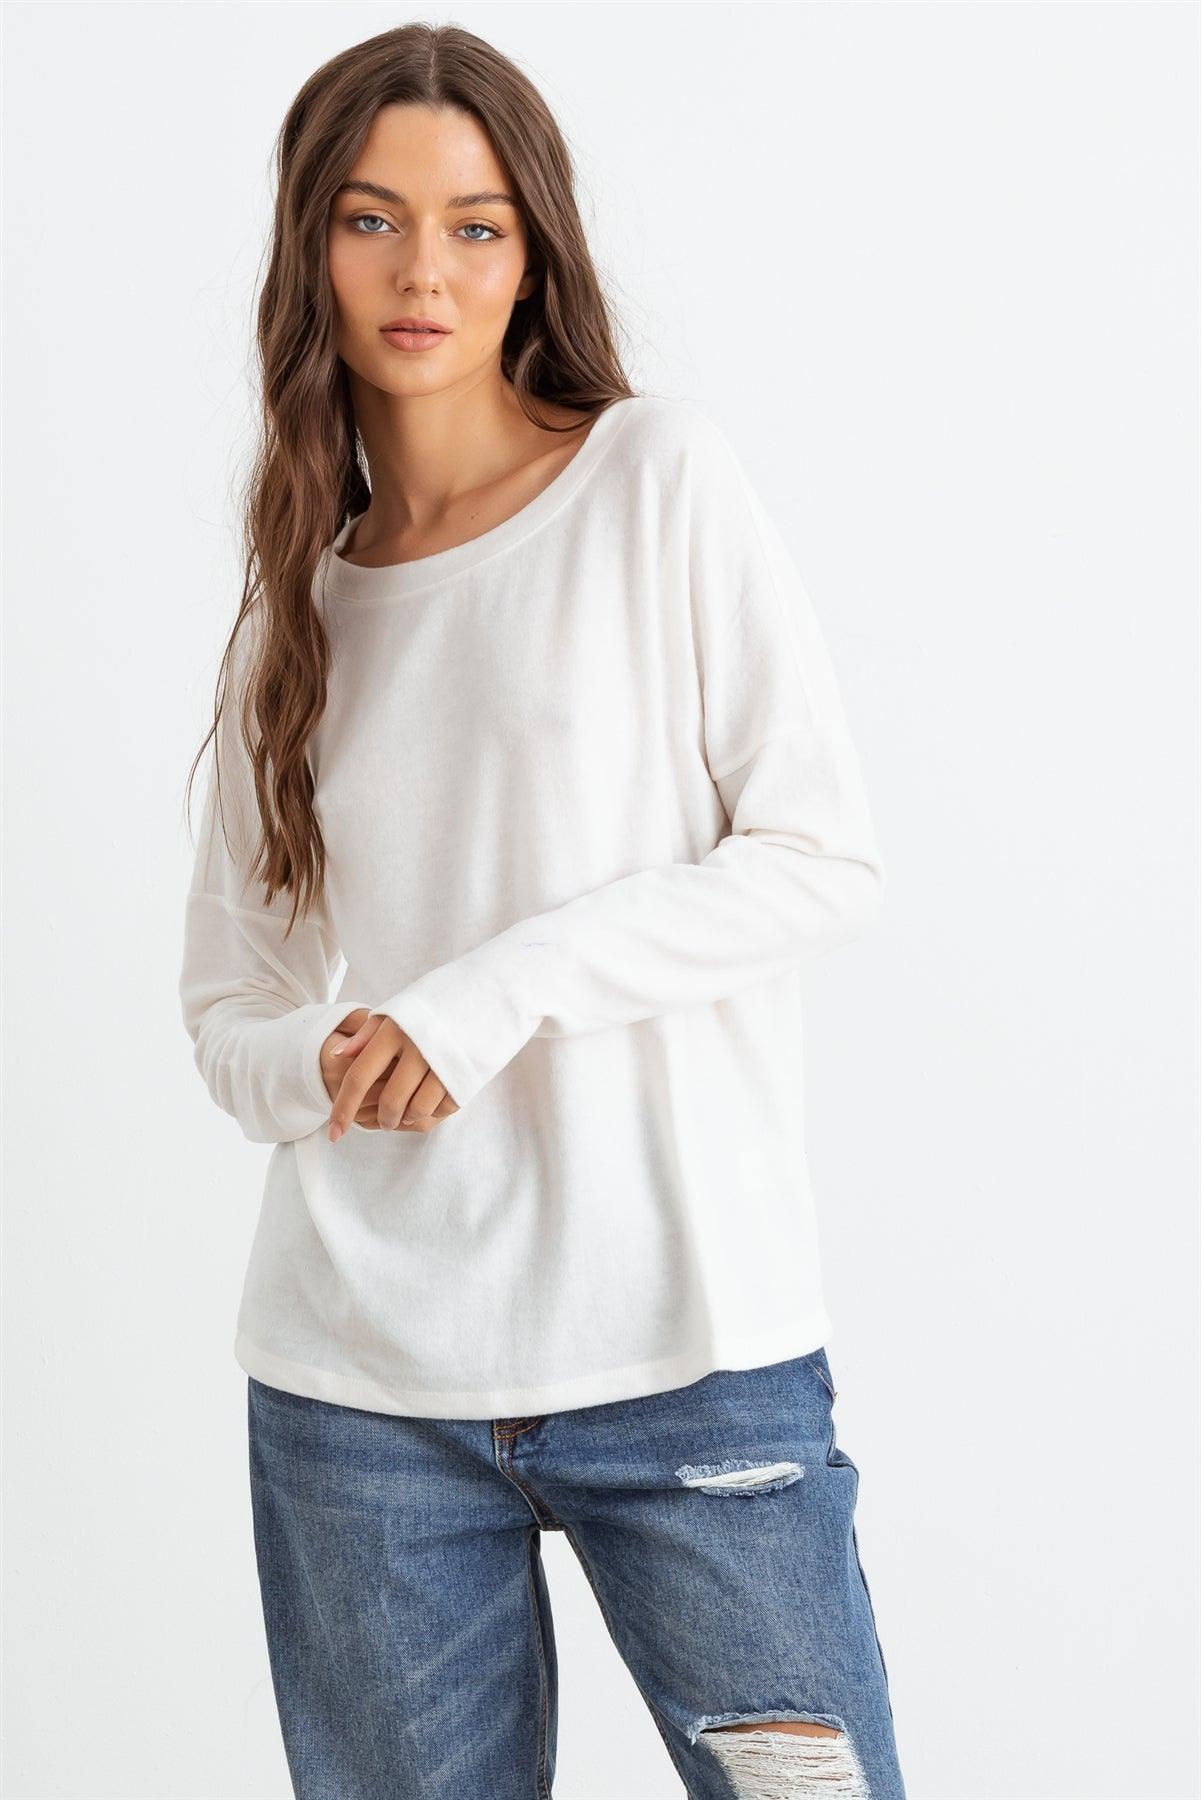 Off-White Long Sleeve Crew Neck Soft To Touch Top /1-1-1